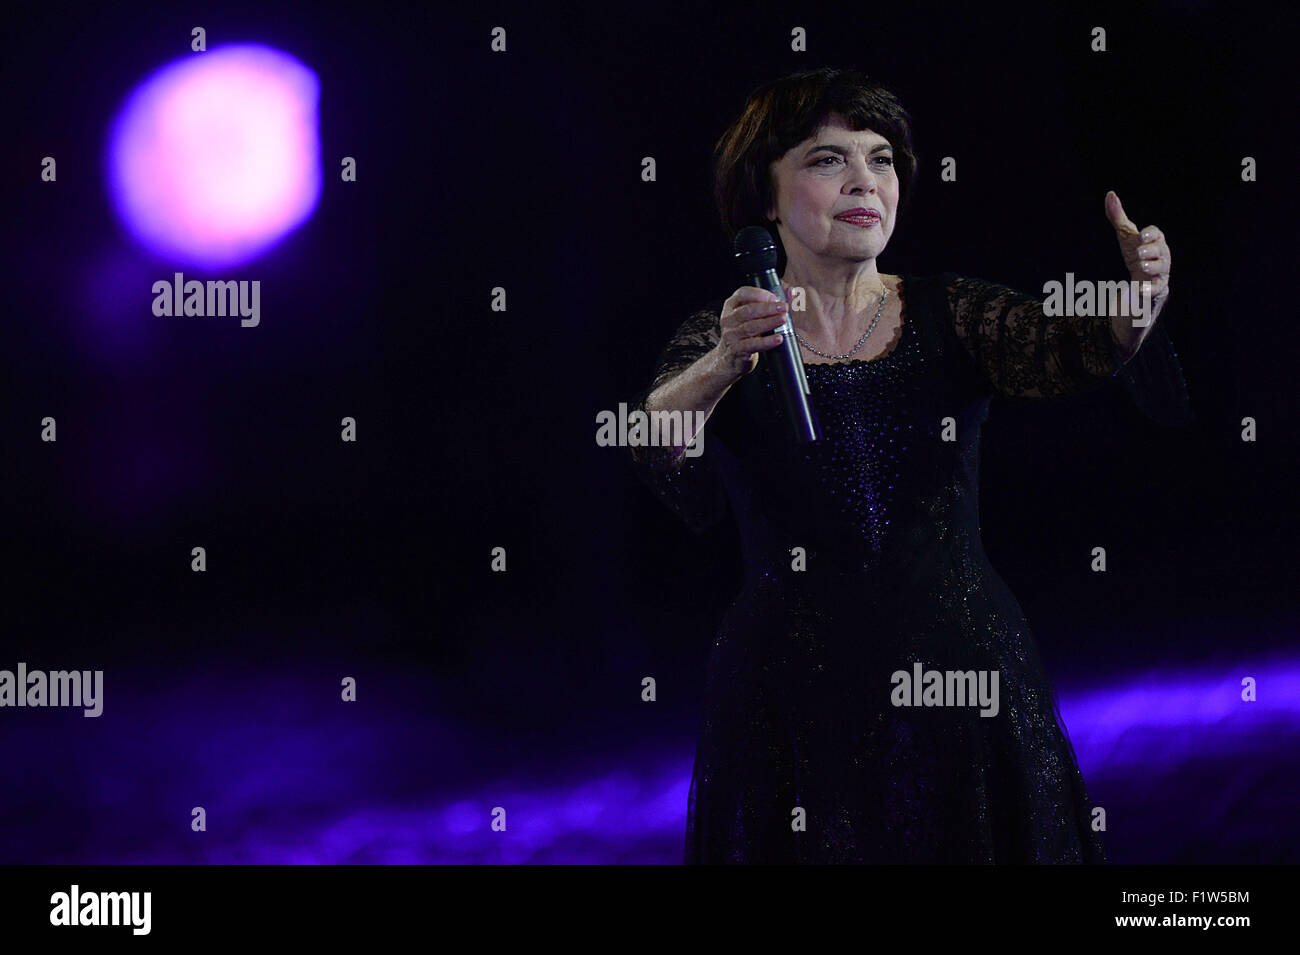 Moscow, Russia. 7th Sep, 2015. French singer Mireille Mathieu performs during the 'Spasskaya Tower' International Military Music Festival in Moscow, Russia, on Sept. 7, 2015. Combined orchestra of all participants perform during the 8th International Military Music Festival 'Spasskaya Tower' held here on Monday. © Pavel Bednyakov/Xinhua/Alamy Live News Stock Photo